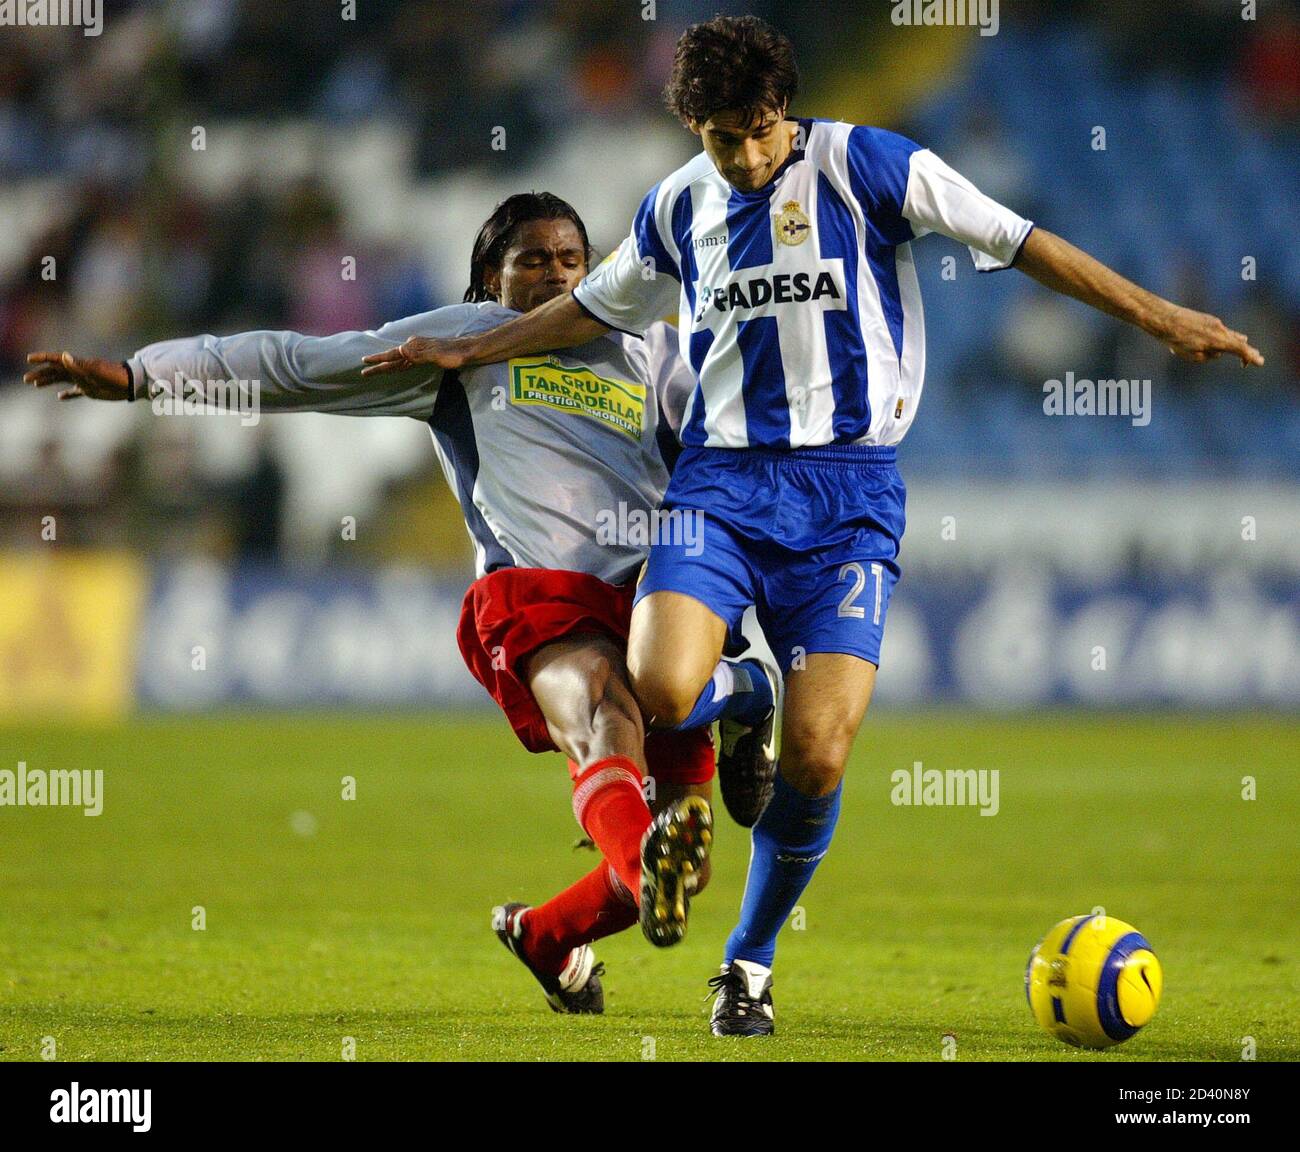 Deportivo Coruna's Valeron and Espanyol's Fredson battle for ball during  their Spanish Primera Liga soccer match in Coruna. Deportivo Coruna's Juan  Valeron (R) and Espanol's Fredson Camara battle for the ball during